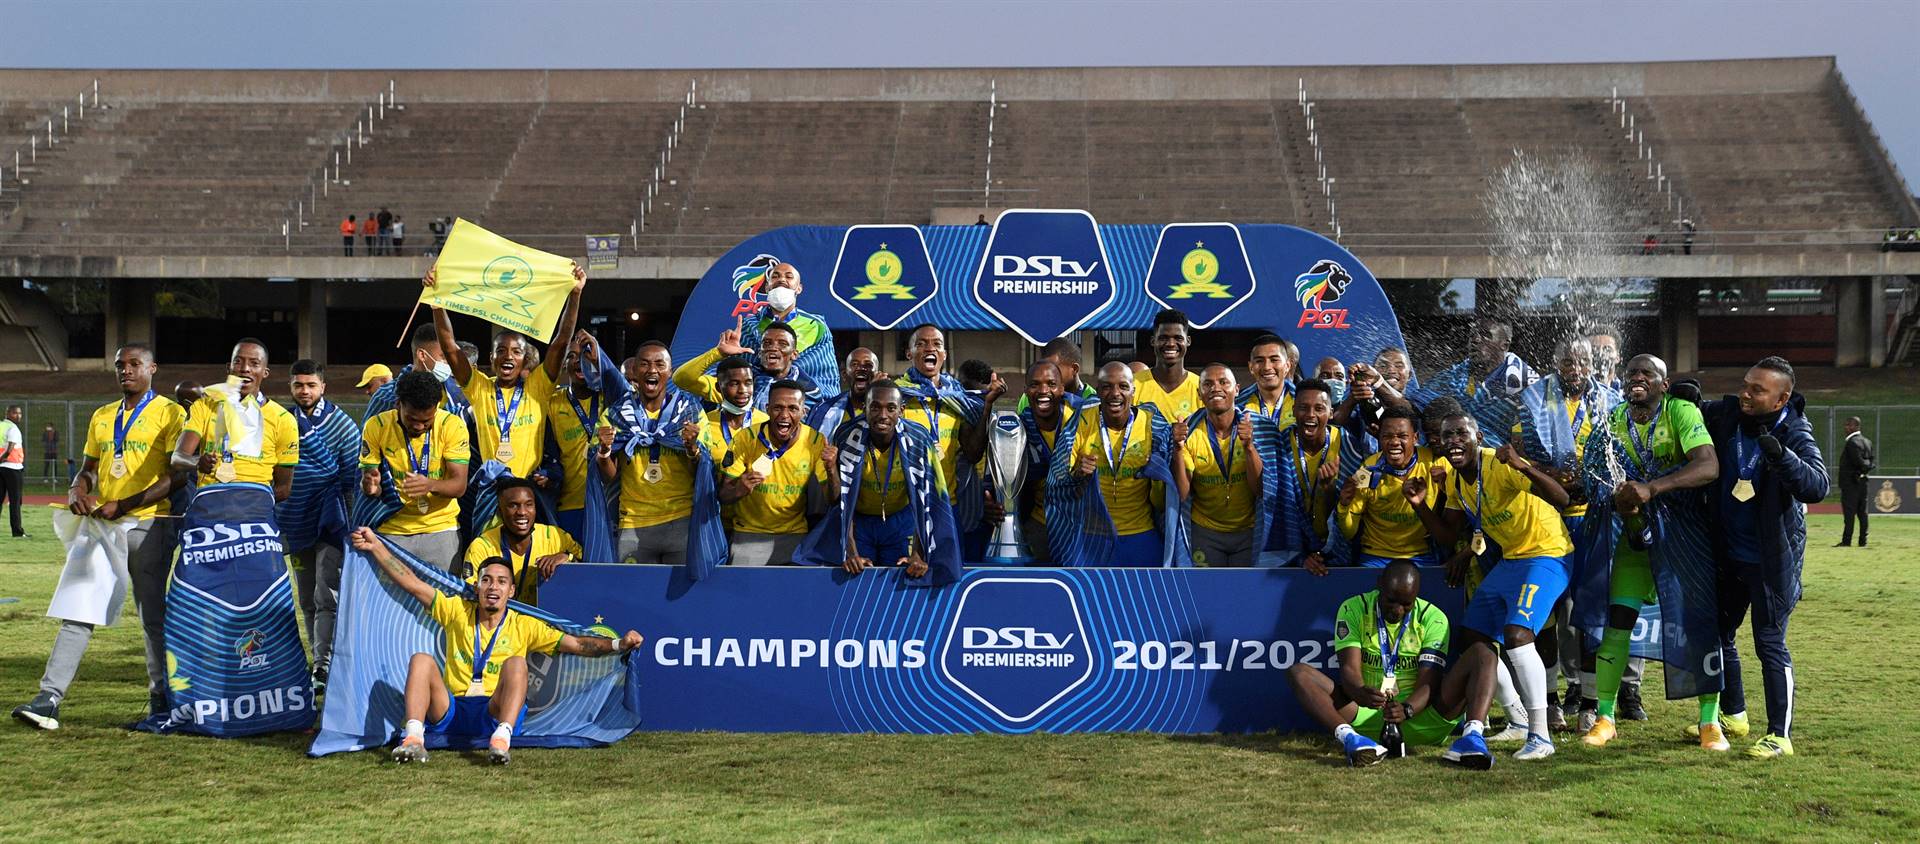 Champions Mamelodi Sundowns will start the defense of their DStv Premiership title with a trip to the Mother City to face Cape Town City in the opening round of the 2022/23 season at Cape Town Stadium on Friday August 5 2022. Photo: Sydney Mahlangu/BackpagePix